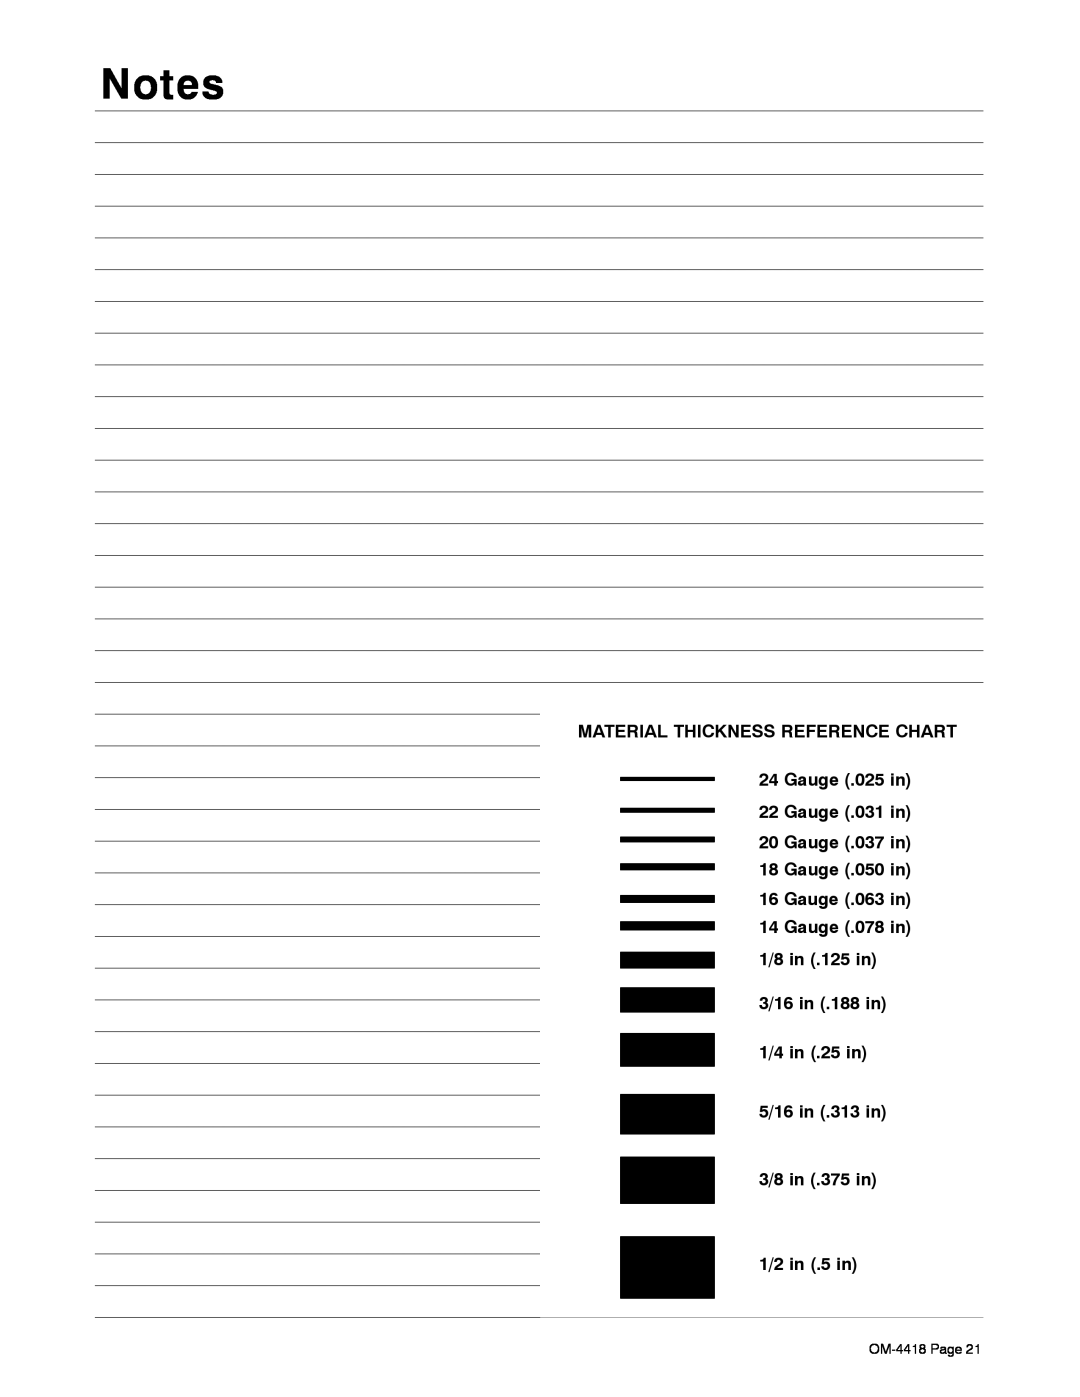 Hobart Welding Products 4500 manual MATERIAL THICKNESS REFERENCE CHART 24 Gauge .025 in 22 Gauge .031 in, OM-4418 Page 